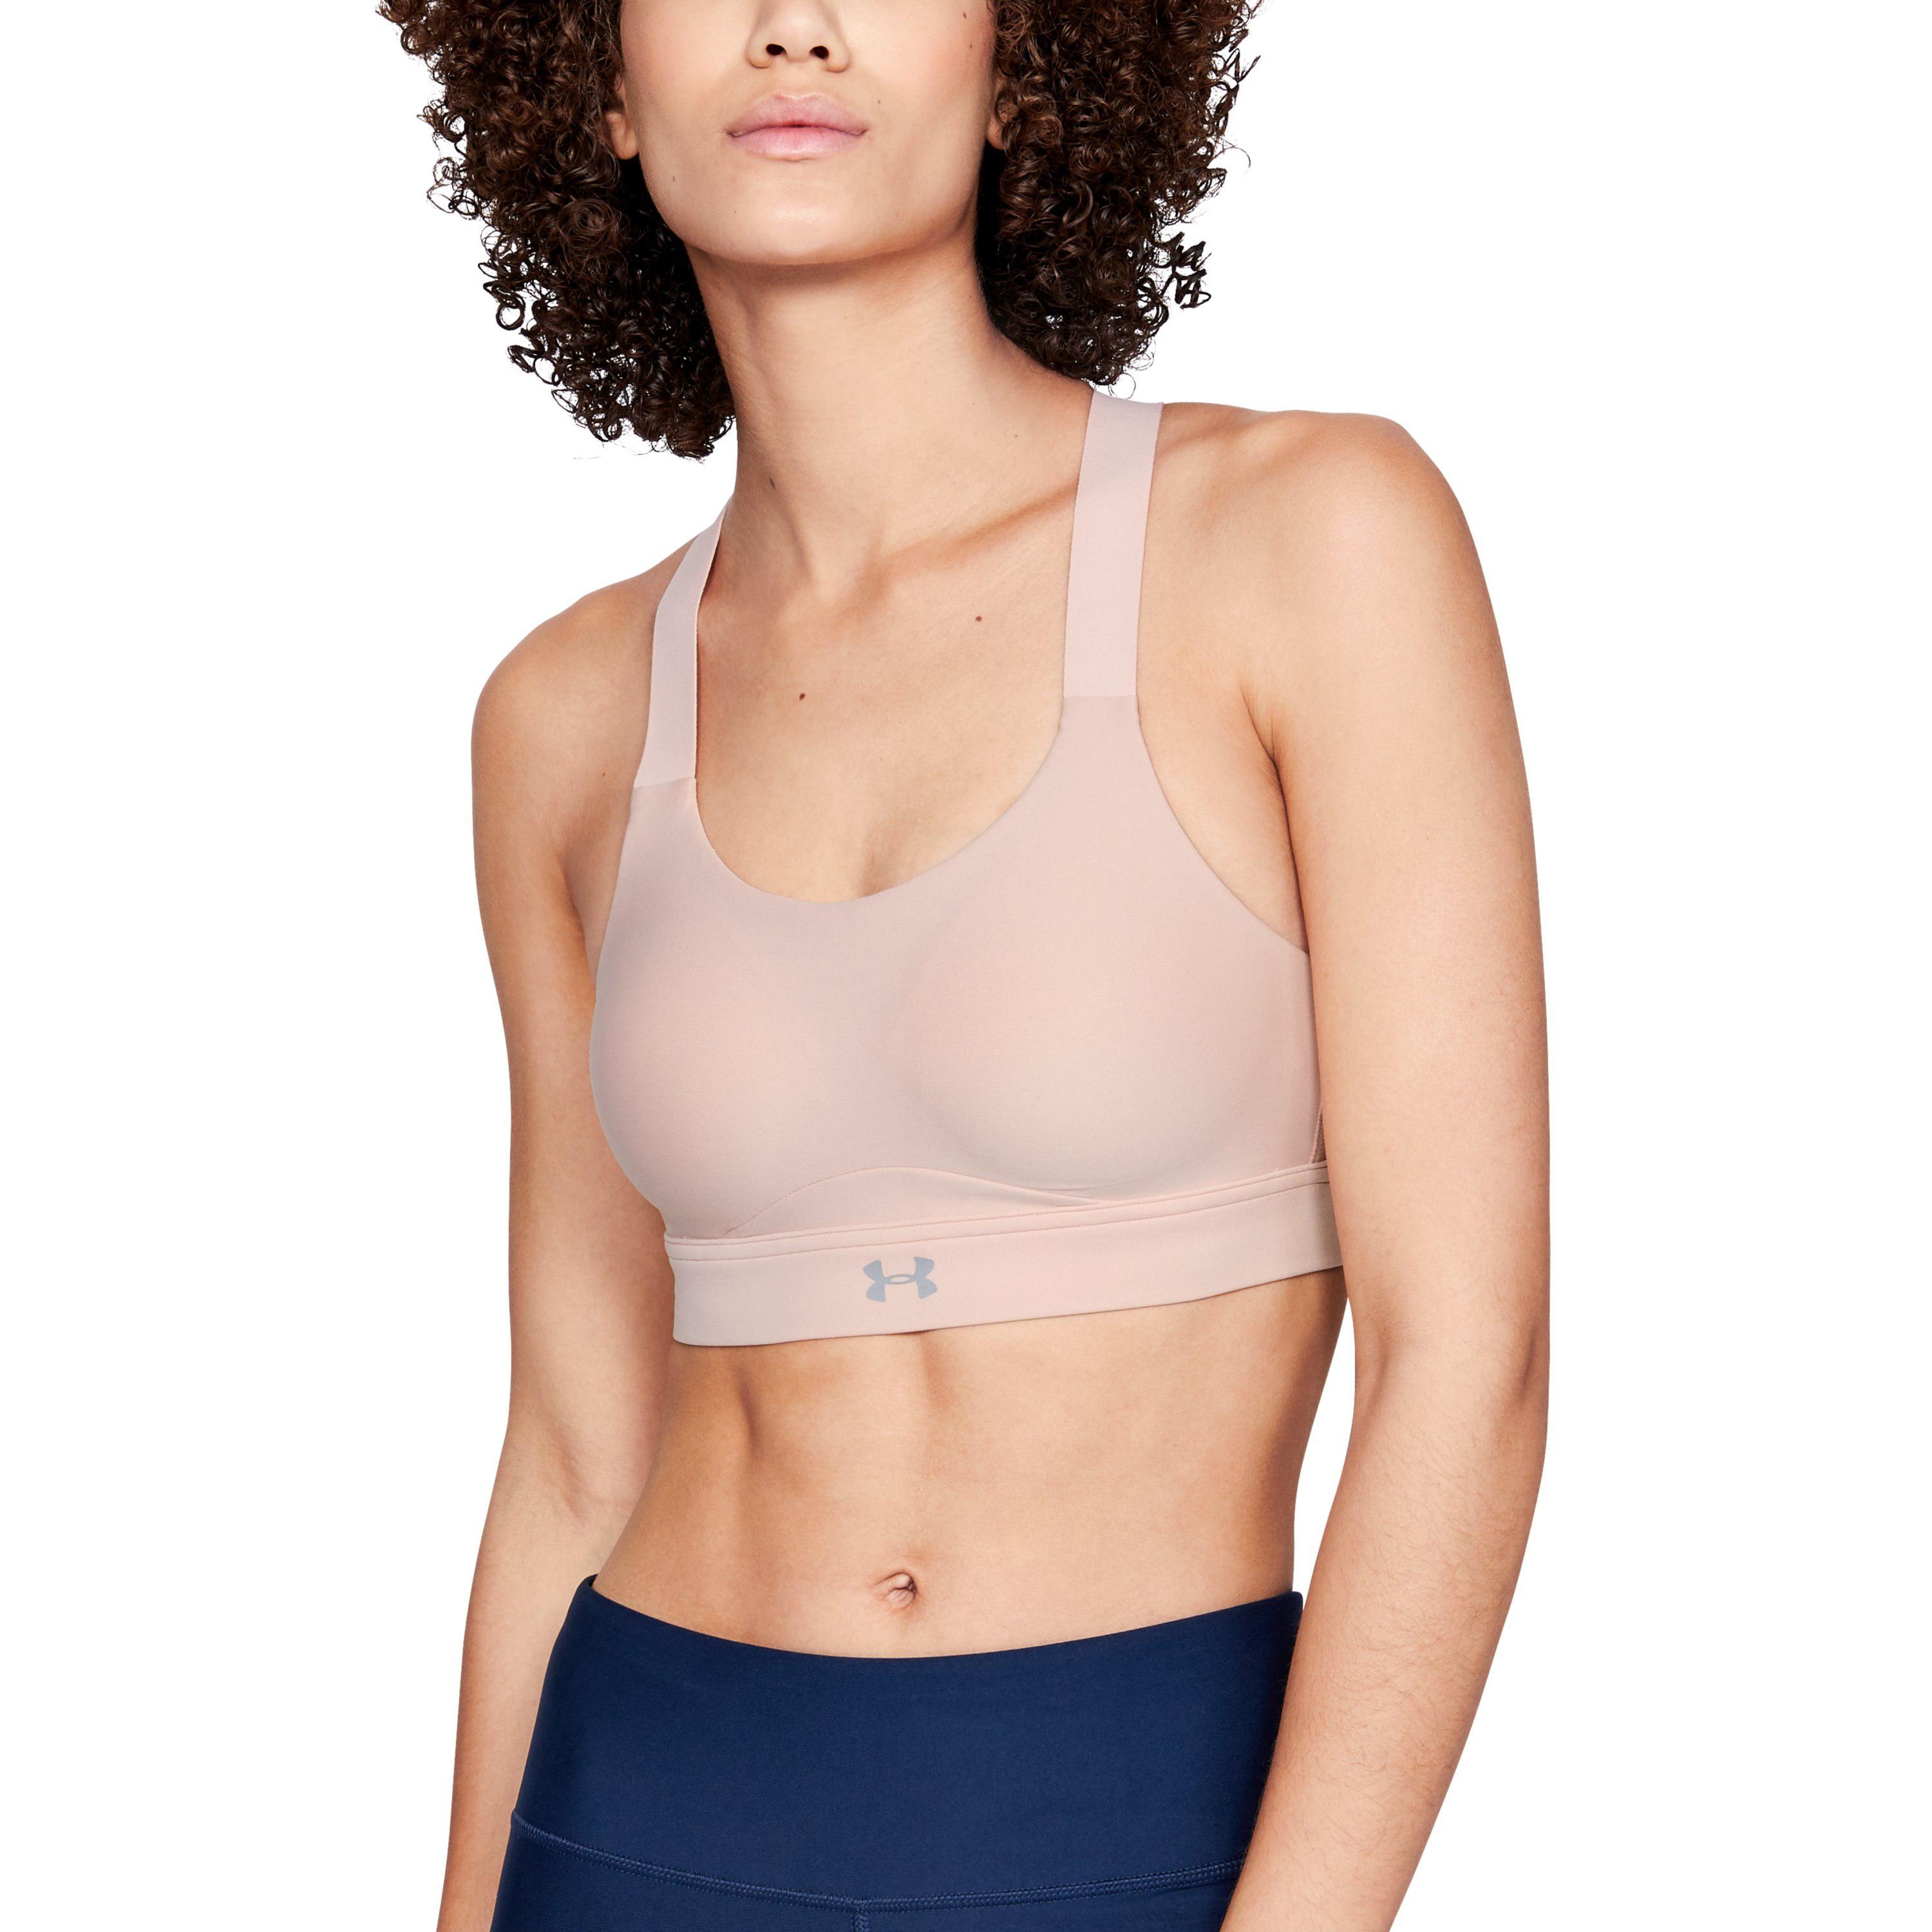 Under Armour Womens Sports Bra High Impact Zip Front Reflective Top 1307227  001